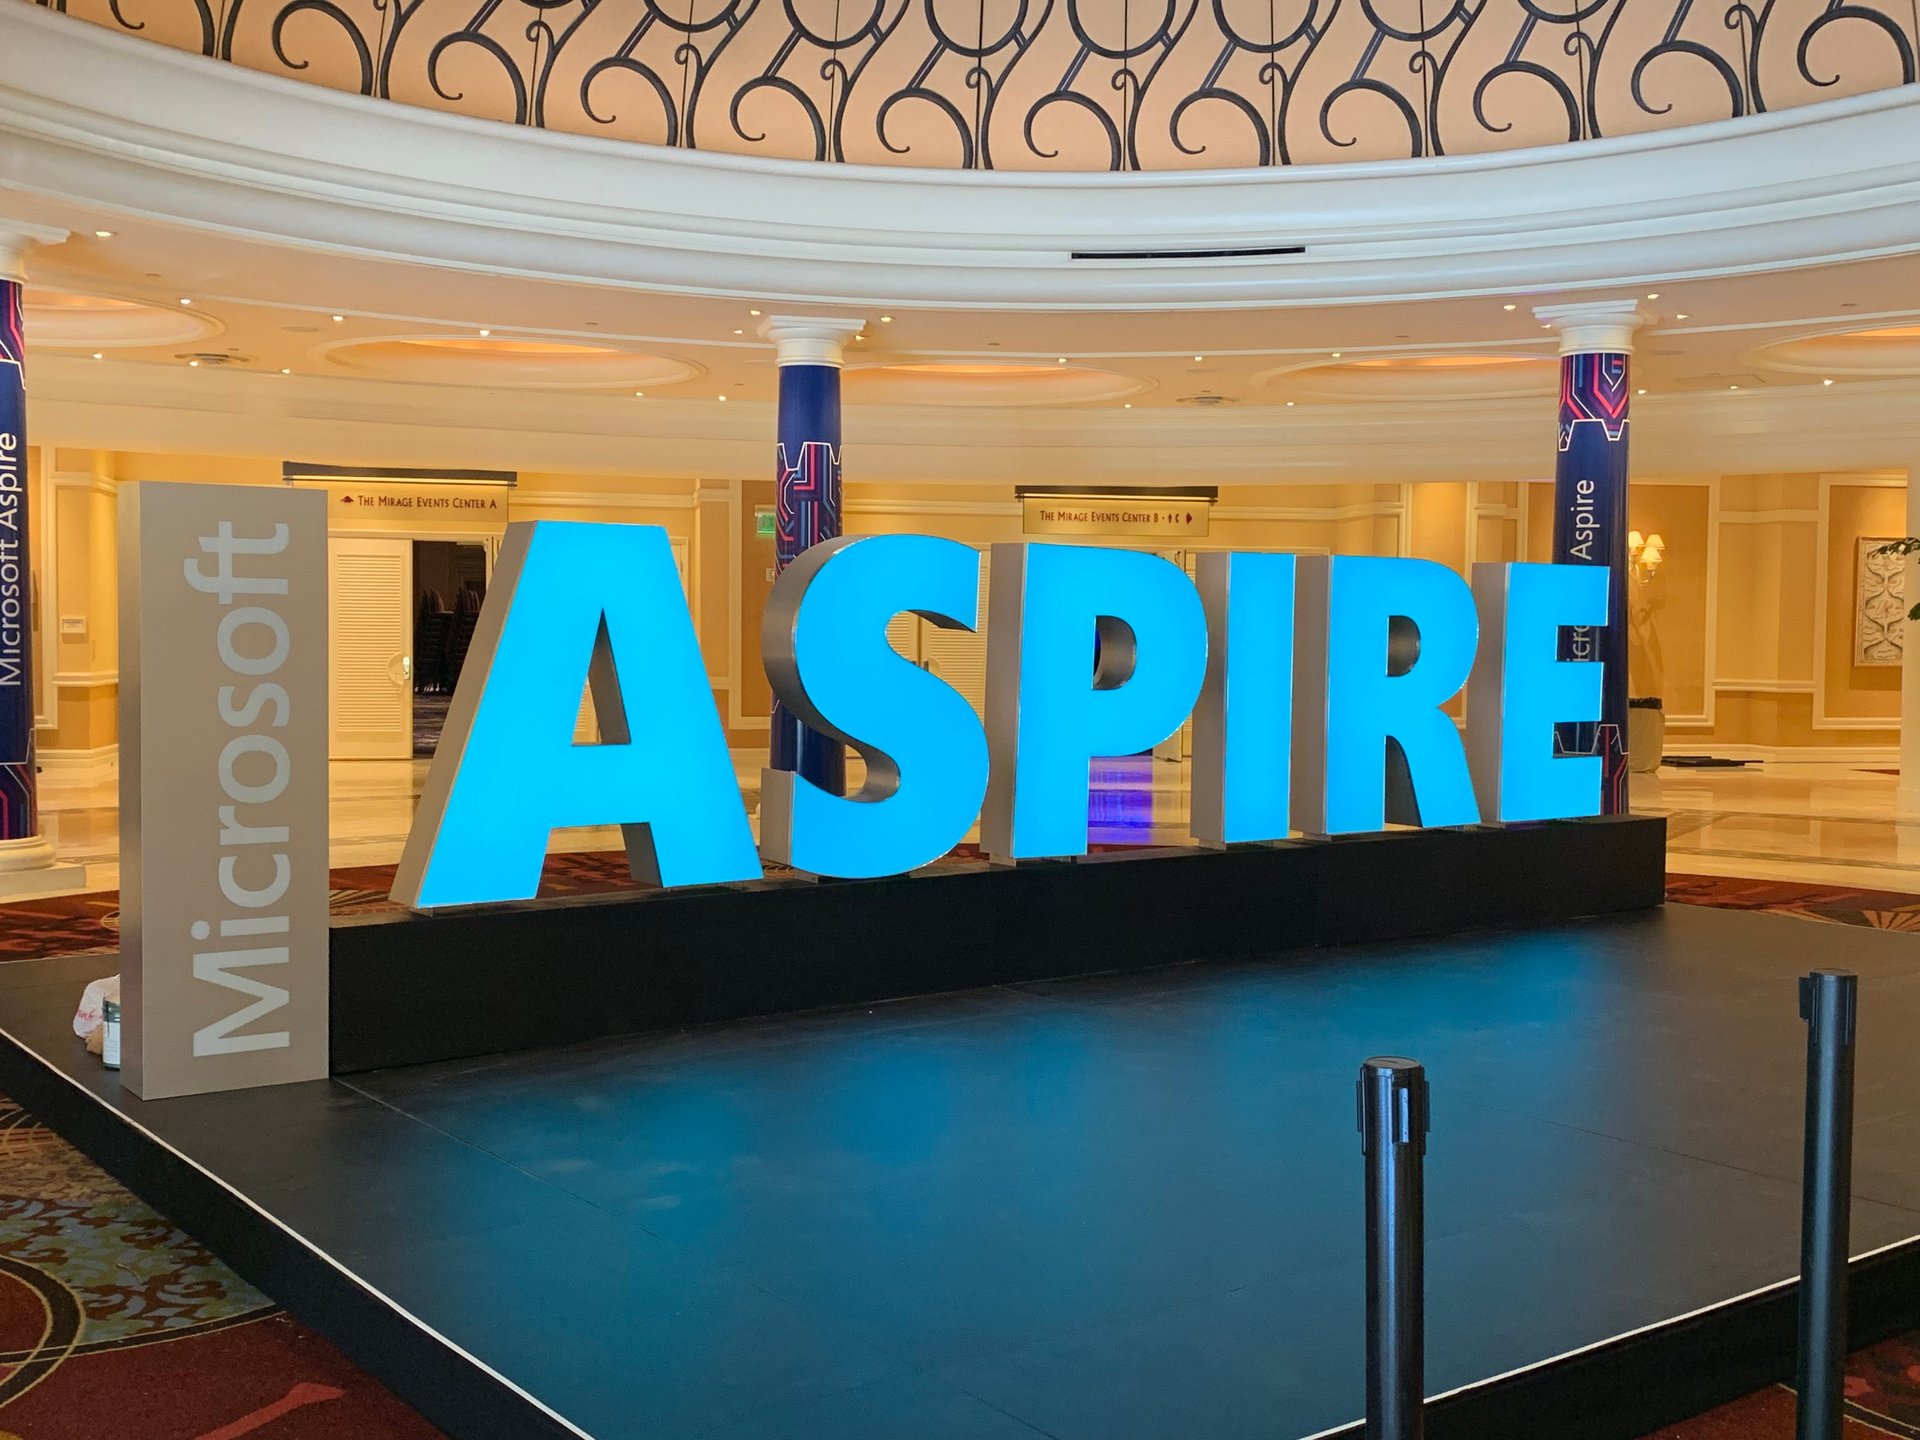 Microsoft Aspire Experience Conference / Summit in Las Vegas, NV